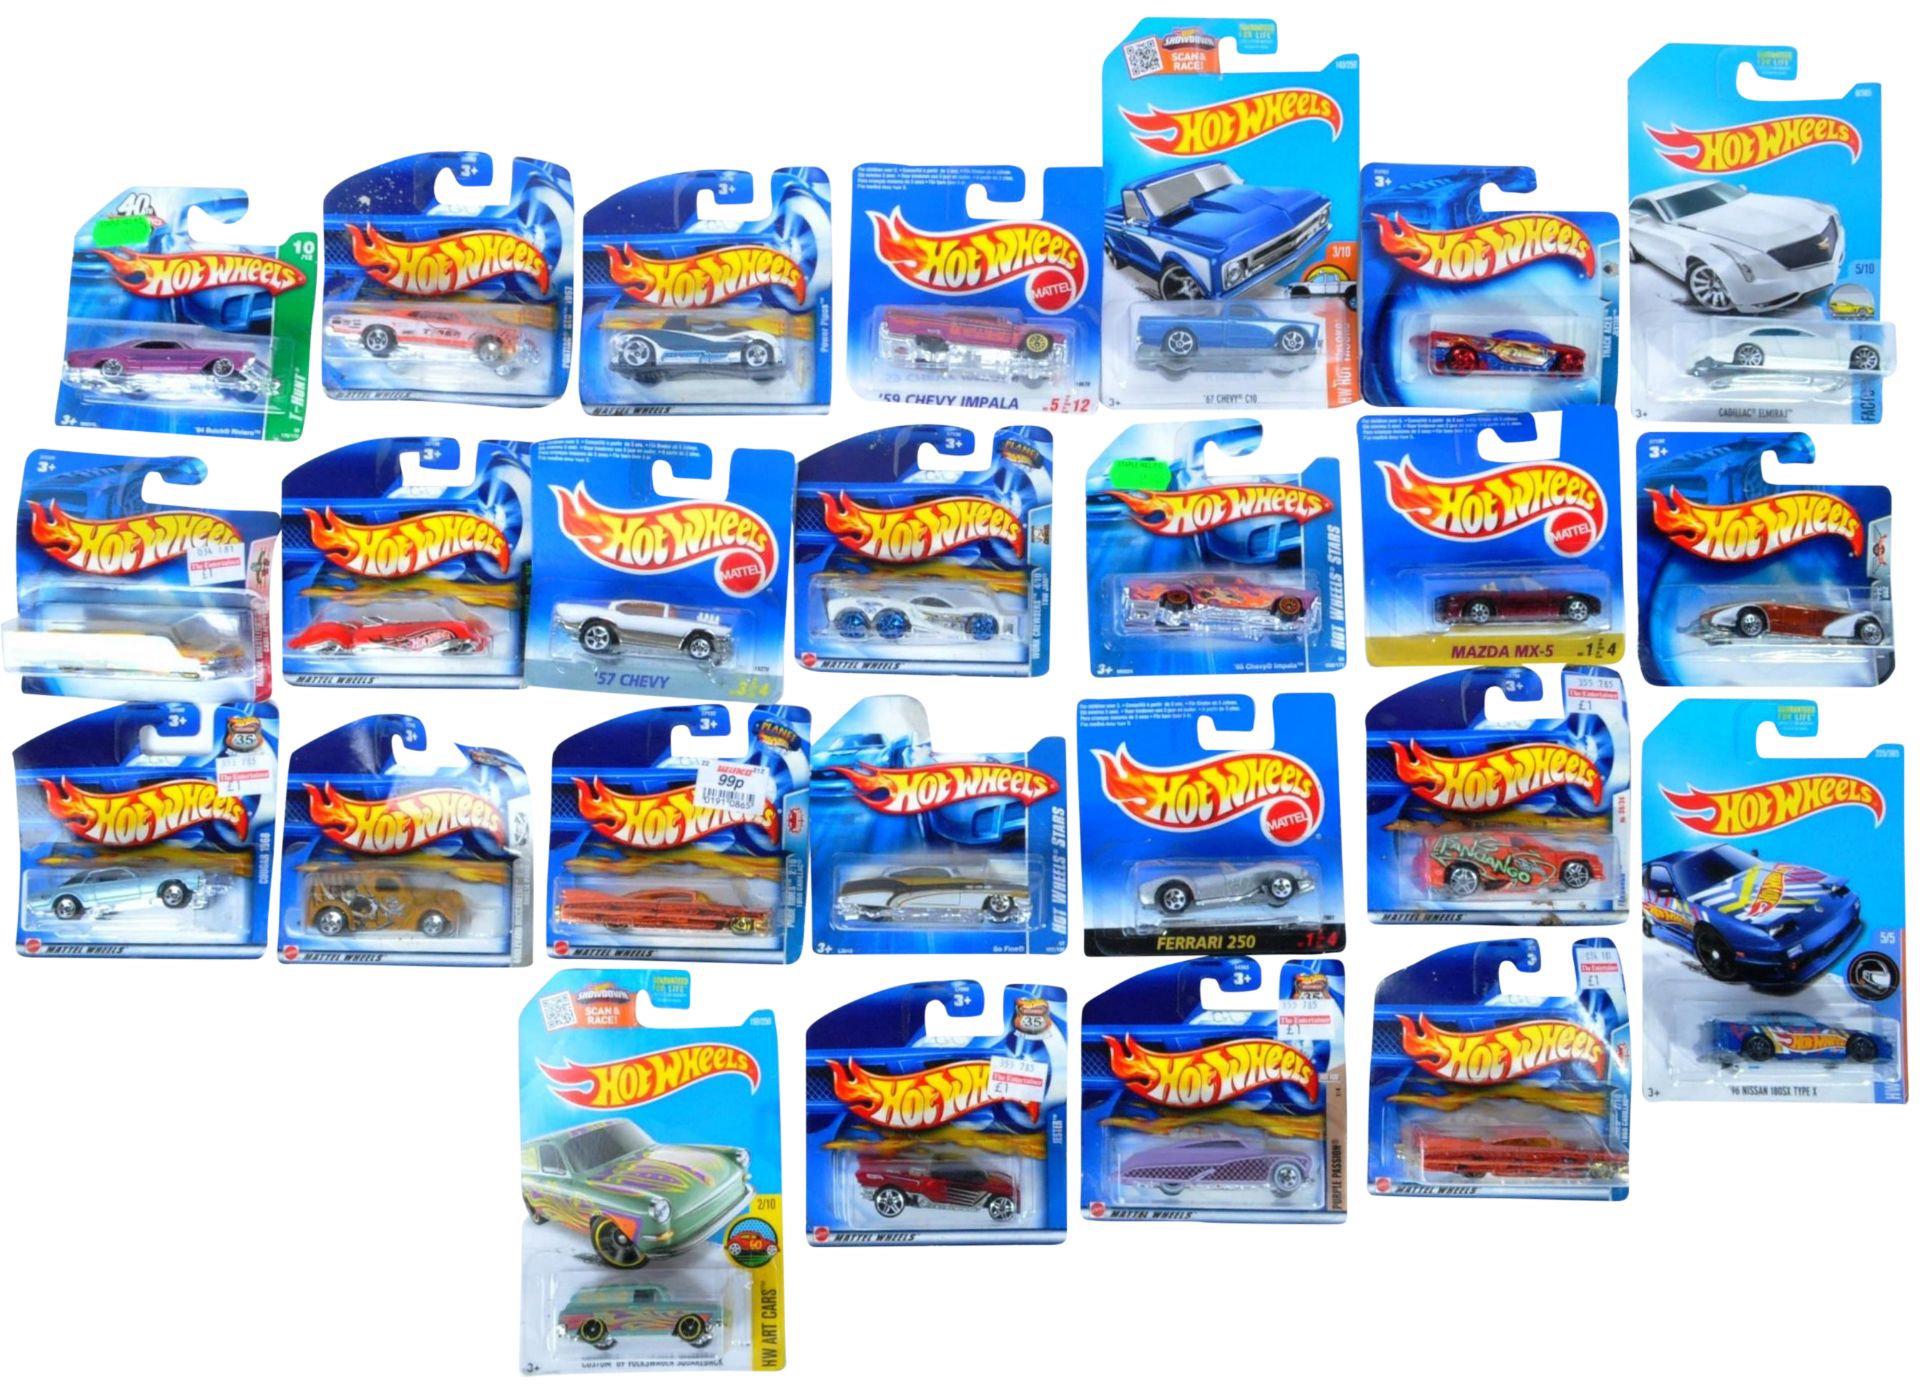 LARGE COLLECTION OF CARDED HOTWHEELS DIECAST MODEL CARS